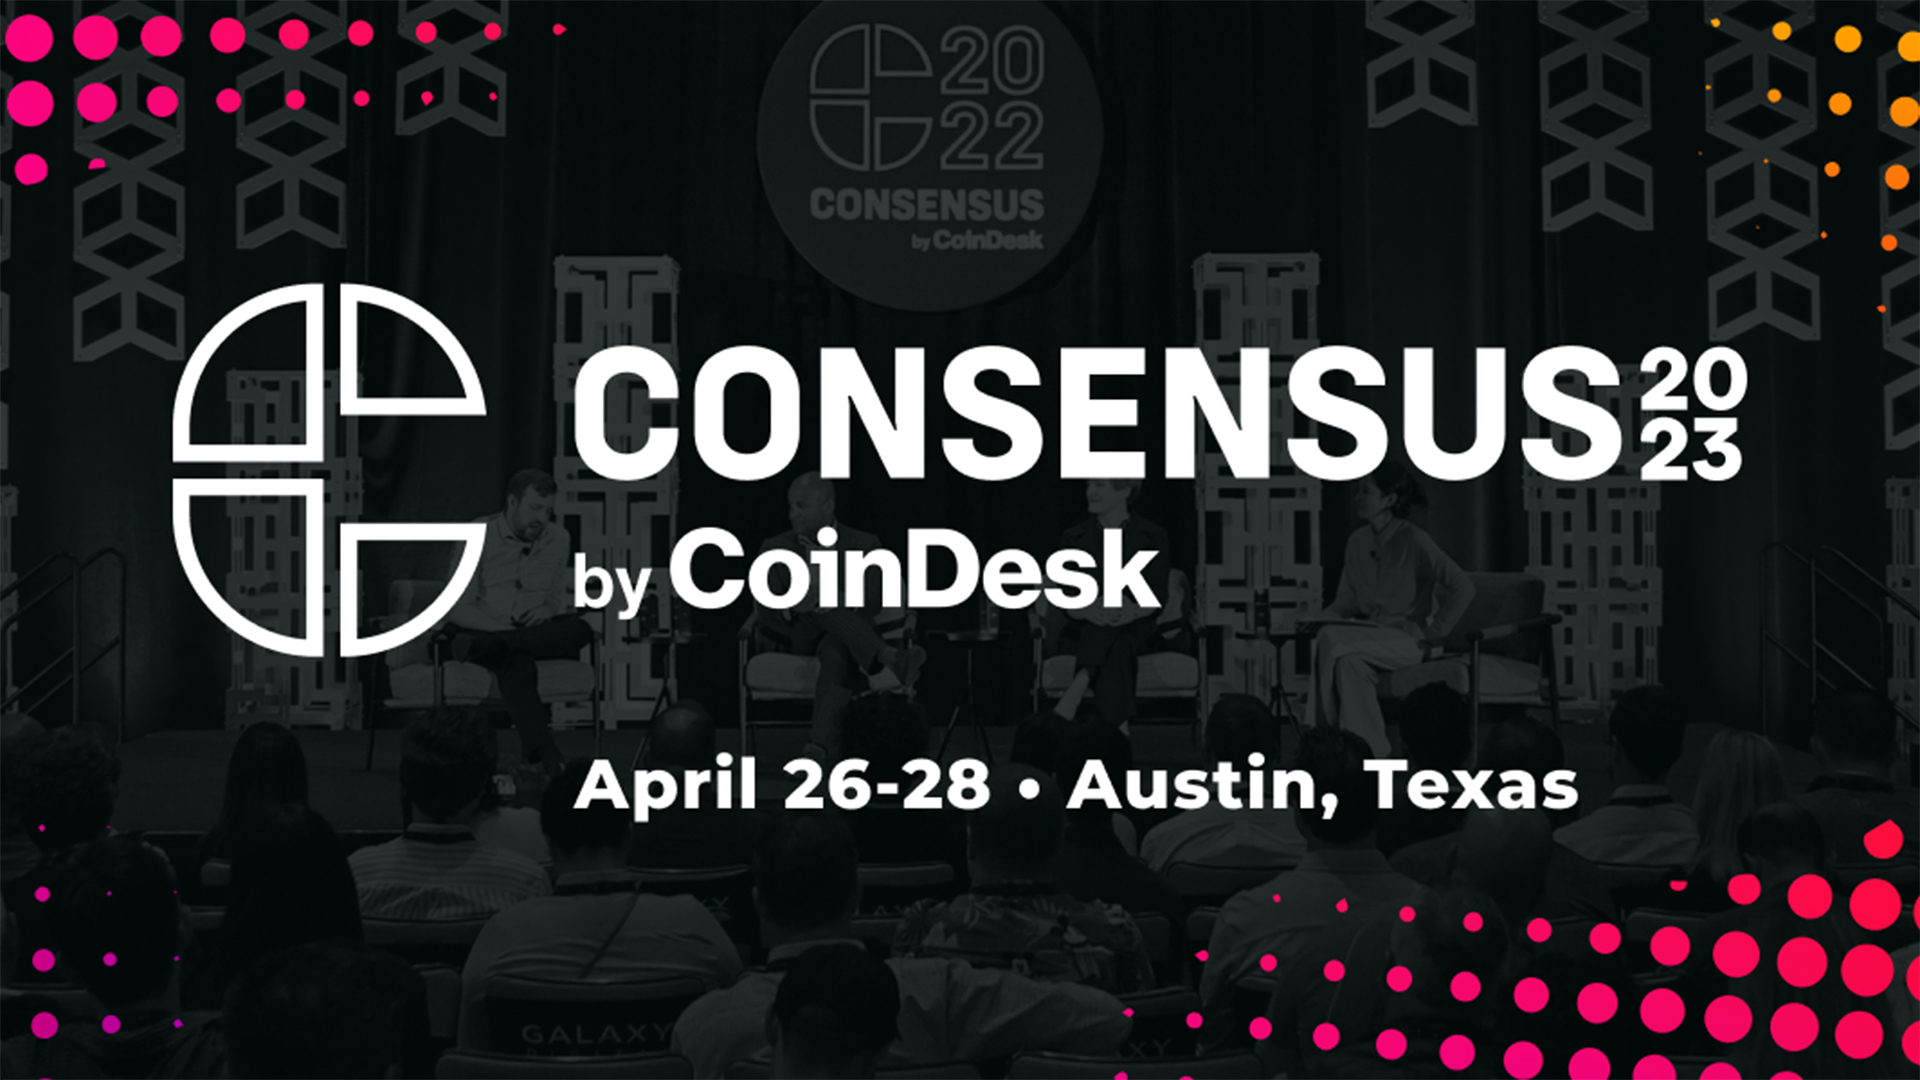 Exclusive Sponsor At Consensus 2023 EVENT The Giving Block 